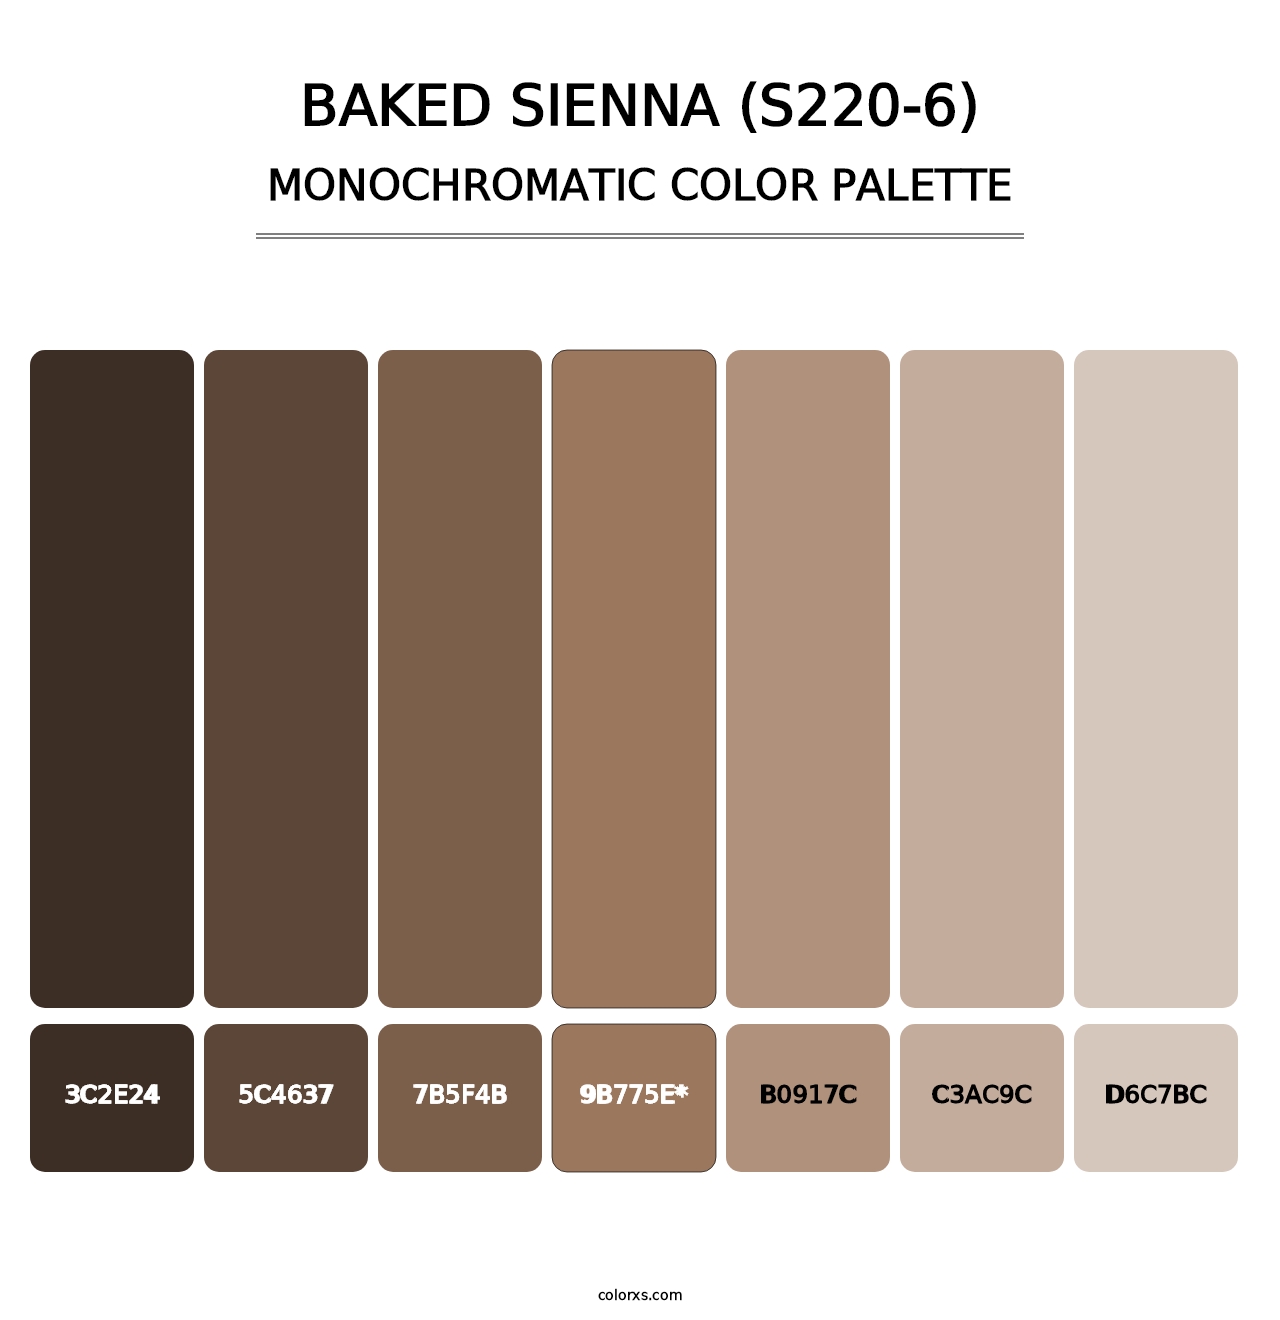 Baked Sienna (S220-6) - Monochromatic Color Palette